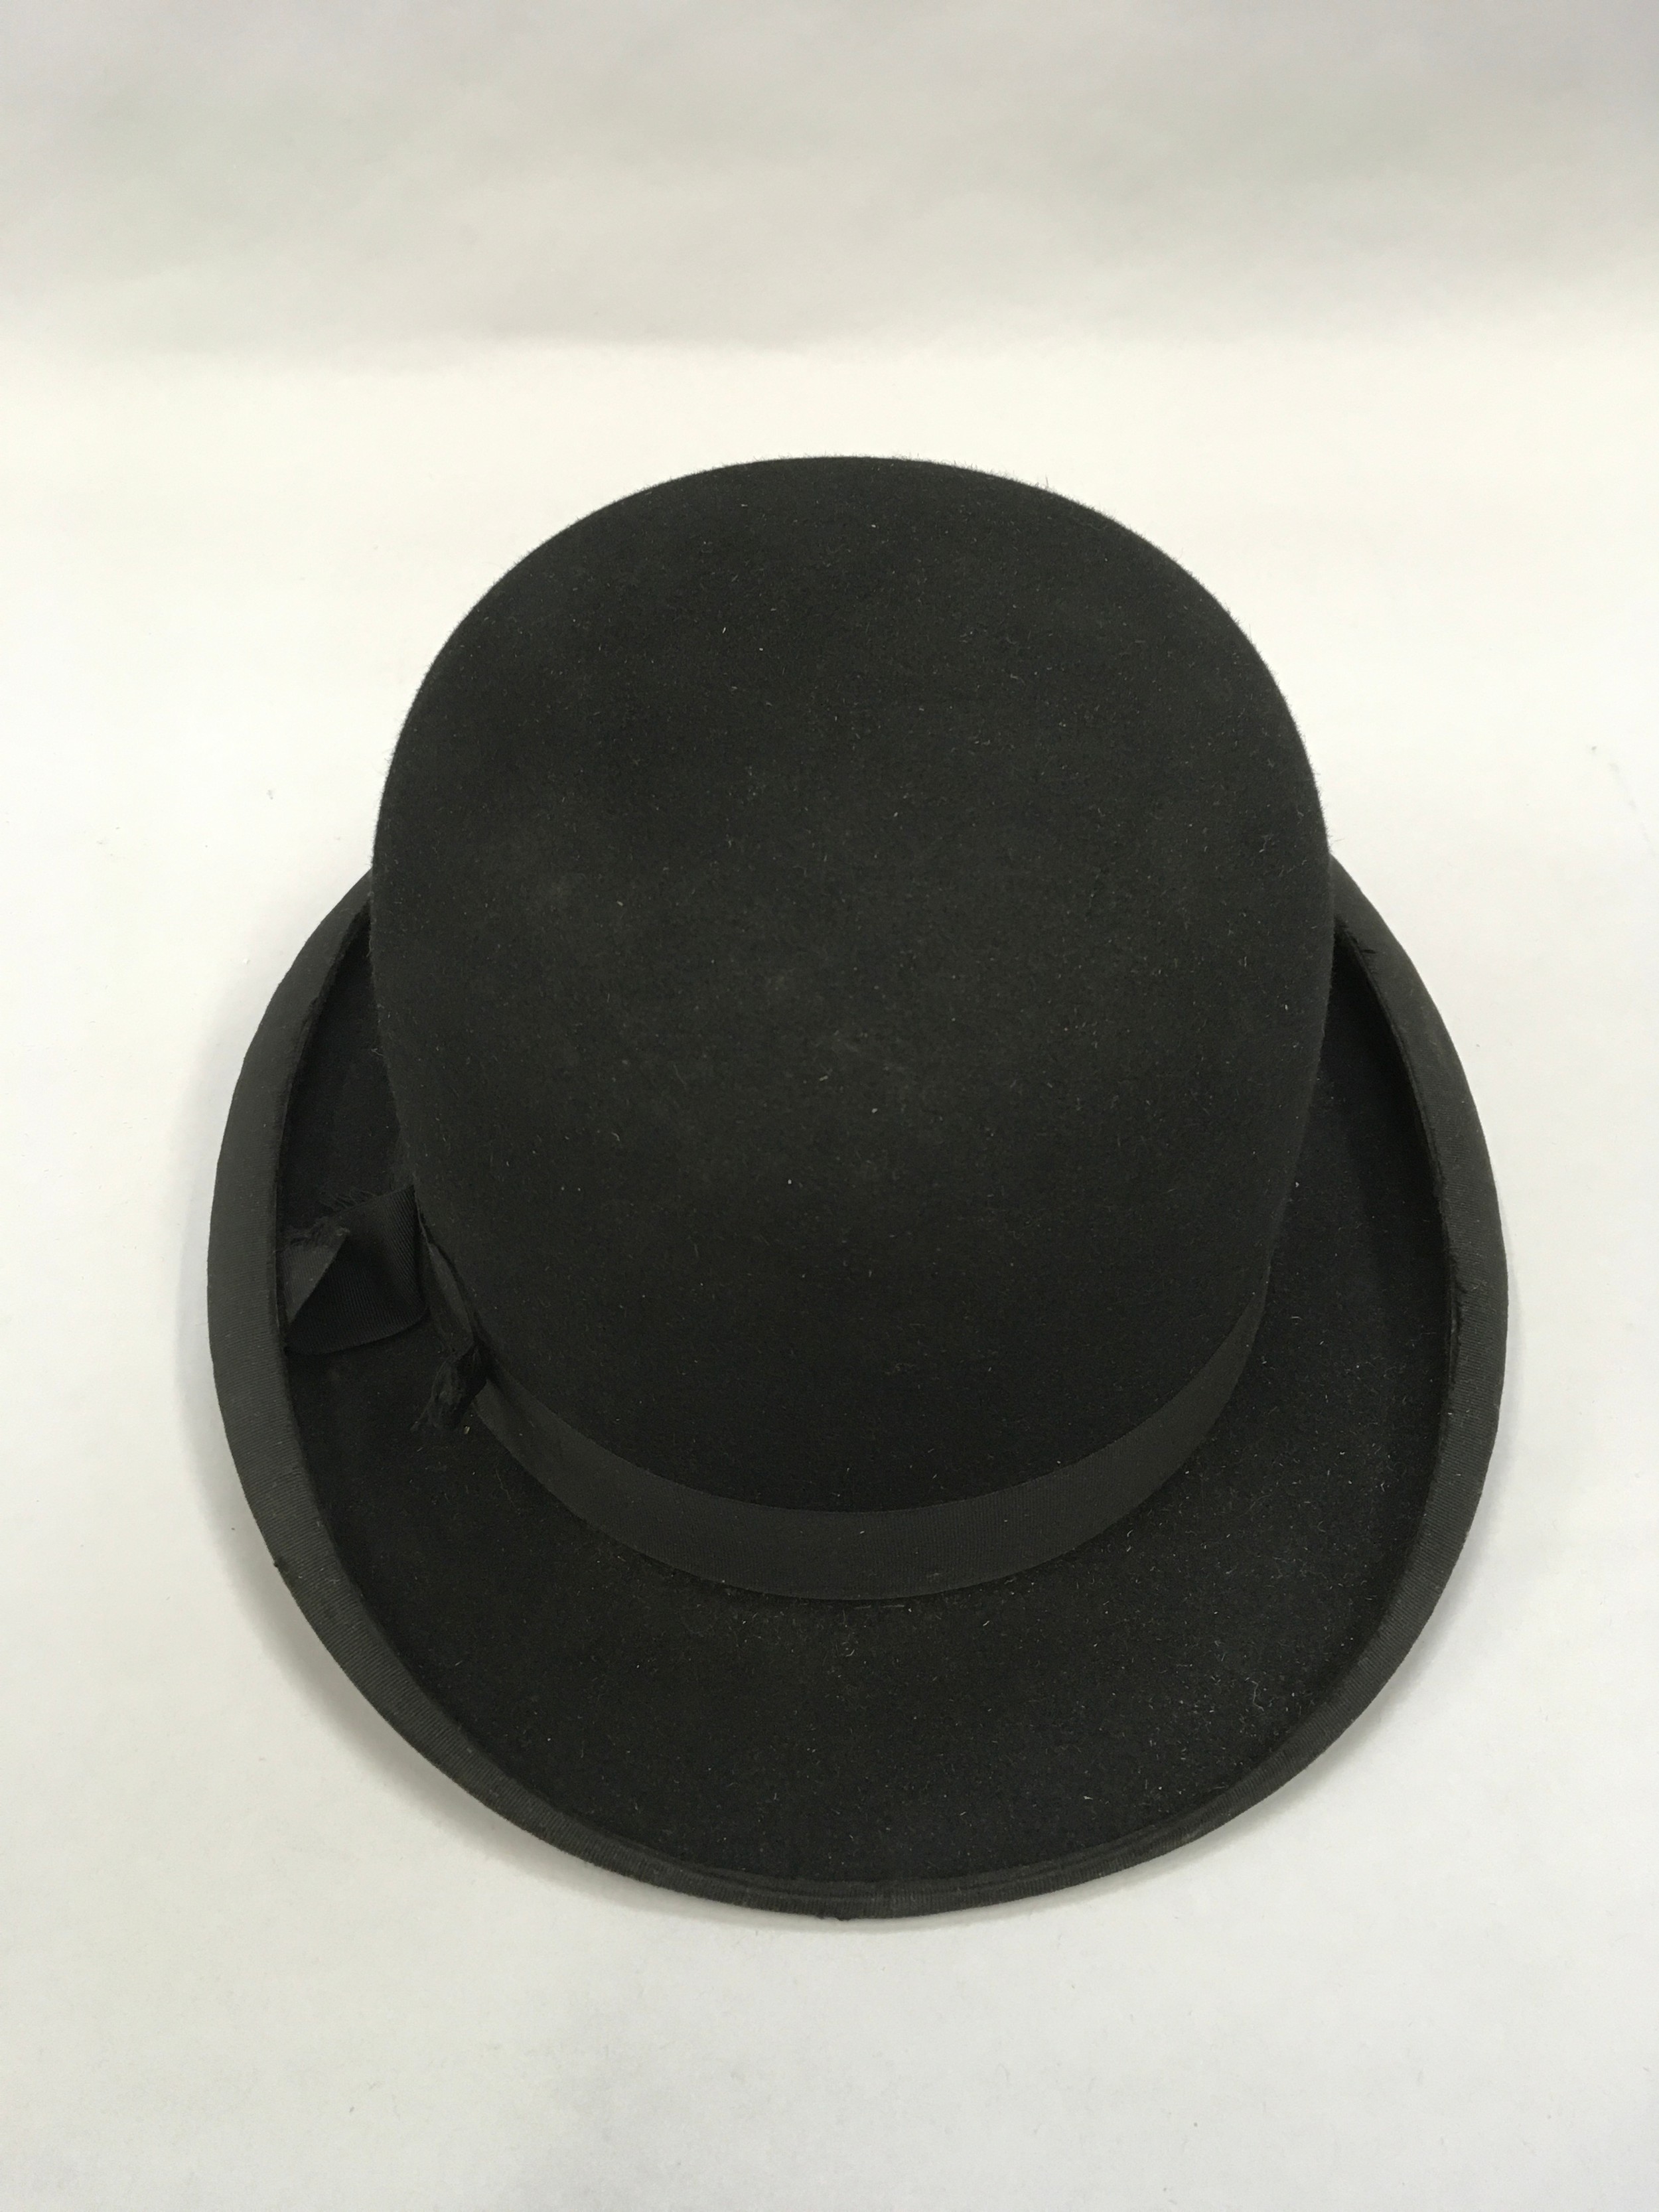 H.J. Whyatt "The Vellum" bowler hat with box marked "Moores, British Made". - Image 3 of 7